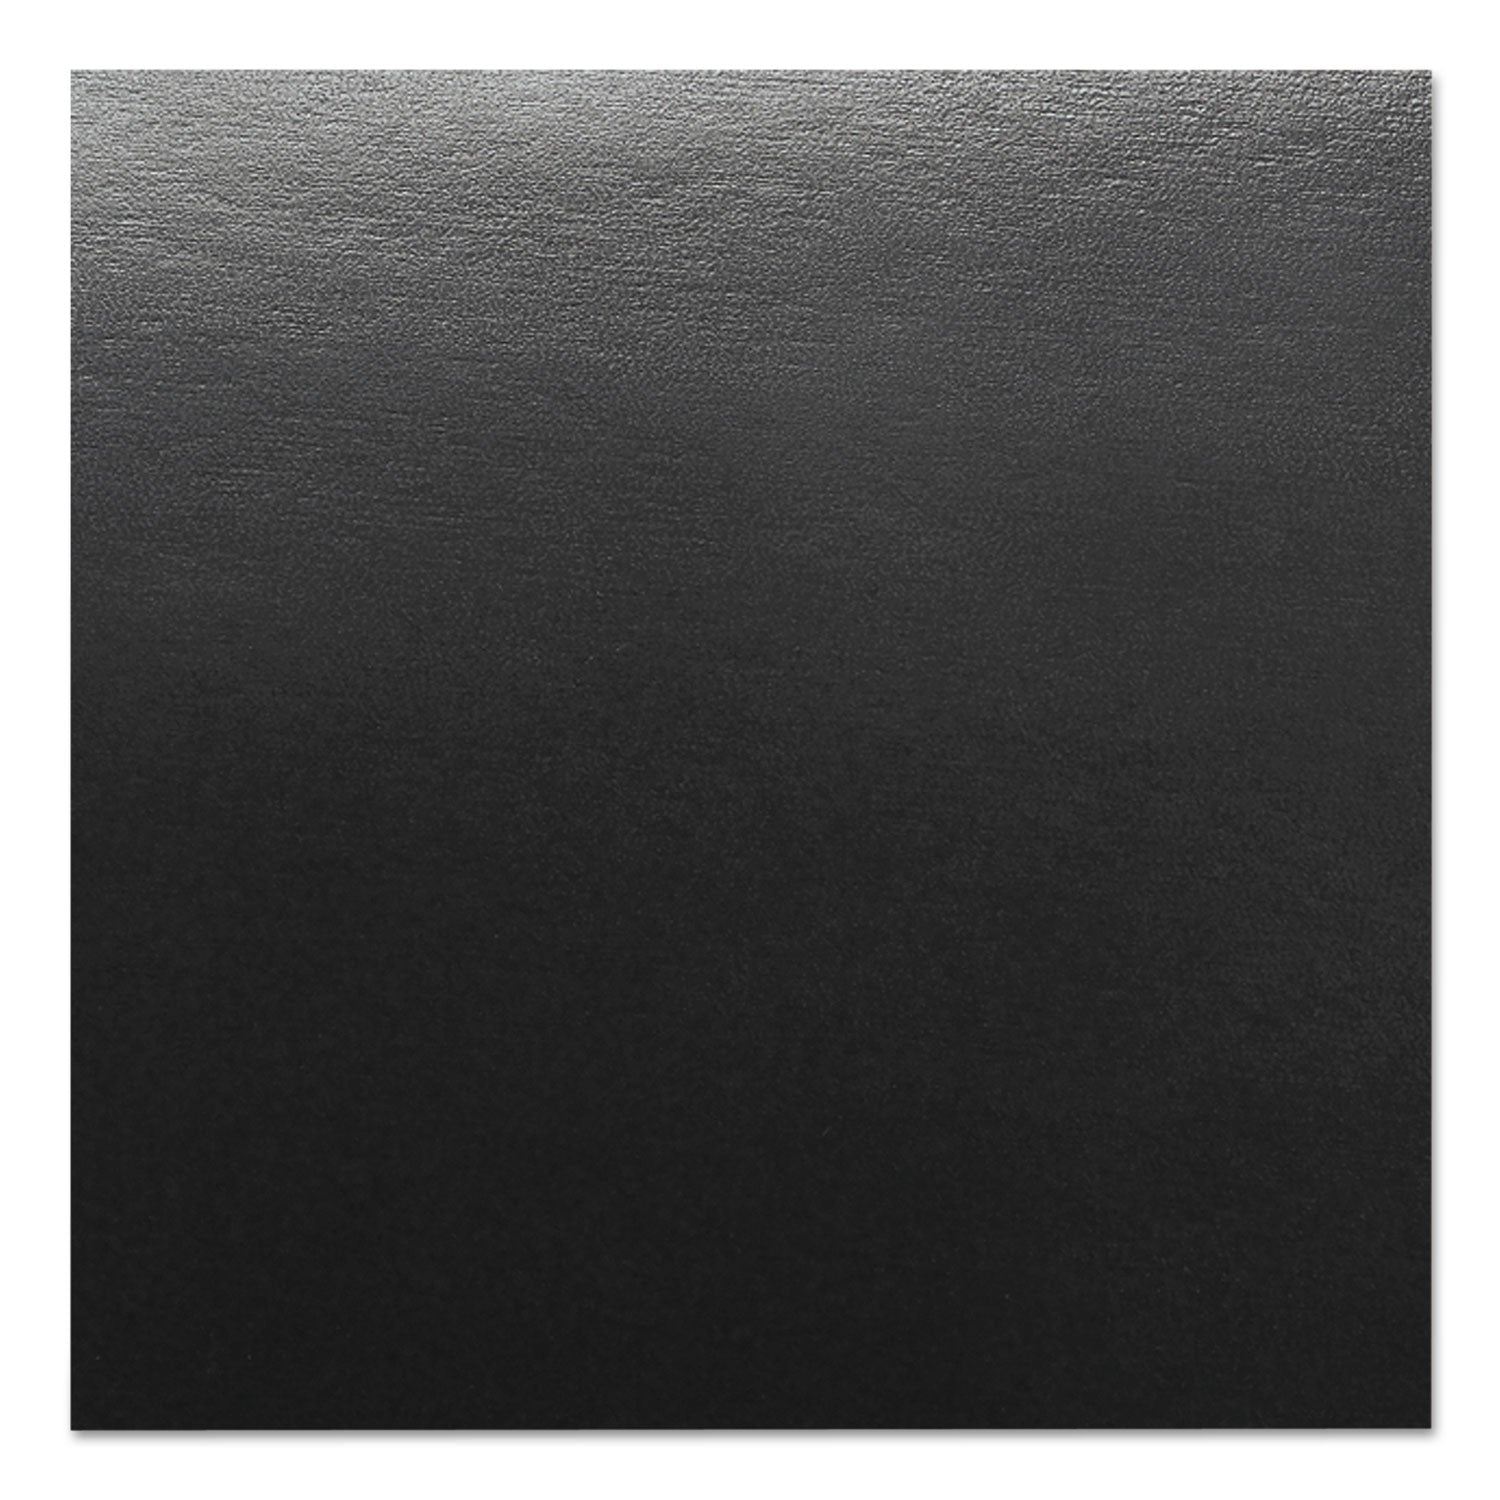 leather-look-presentation-covers-for-binding-systems-black-1125-x-875-unpunched-50-sets-pack_gbc2001712 - 2